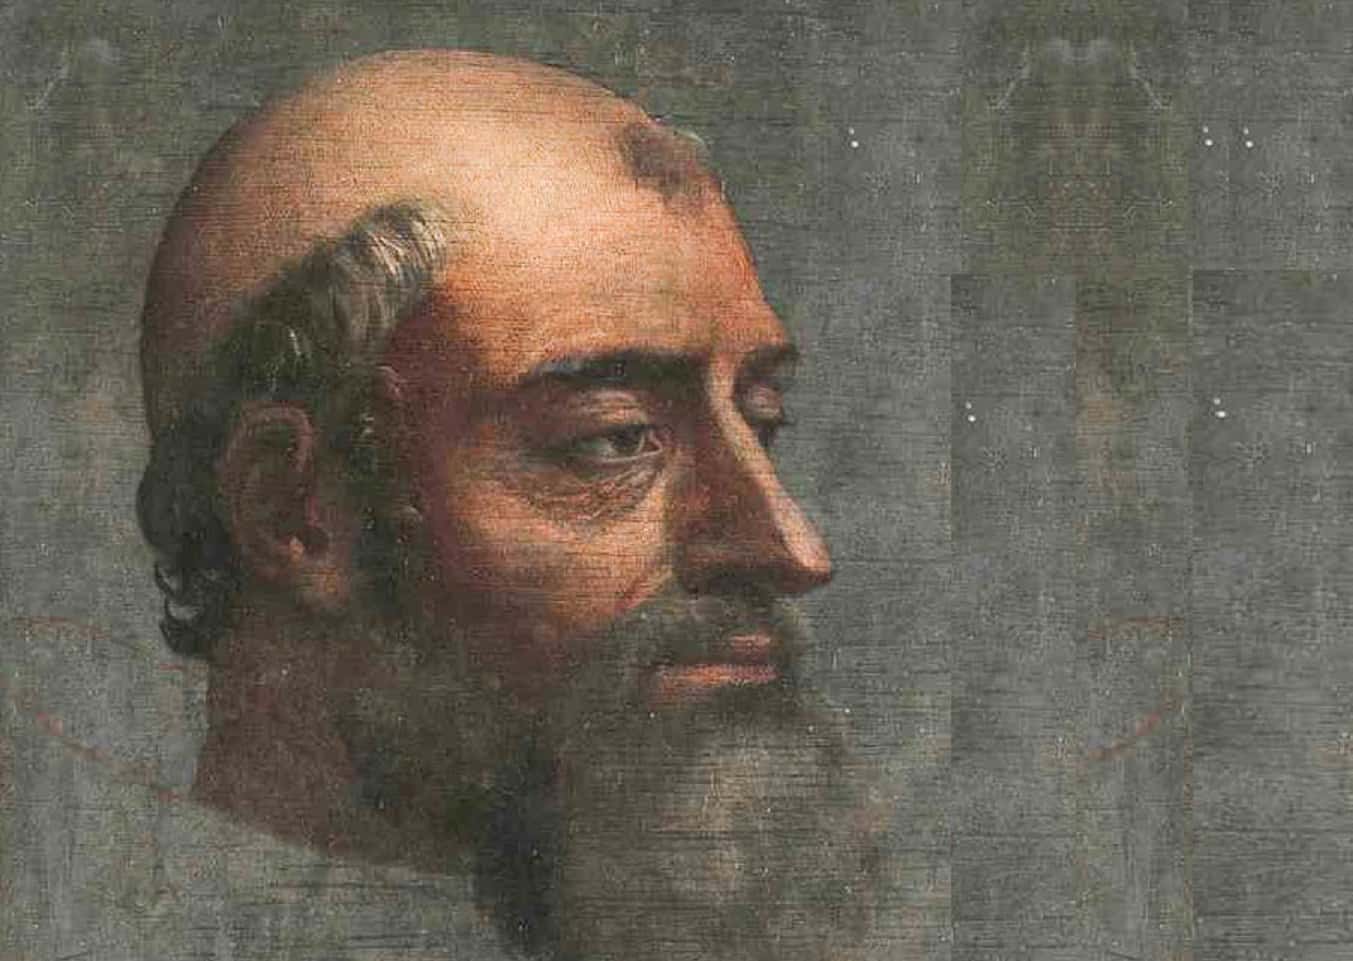 Pope Clement VII Facts